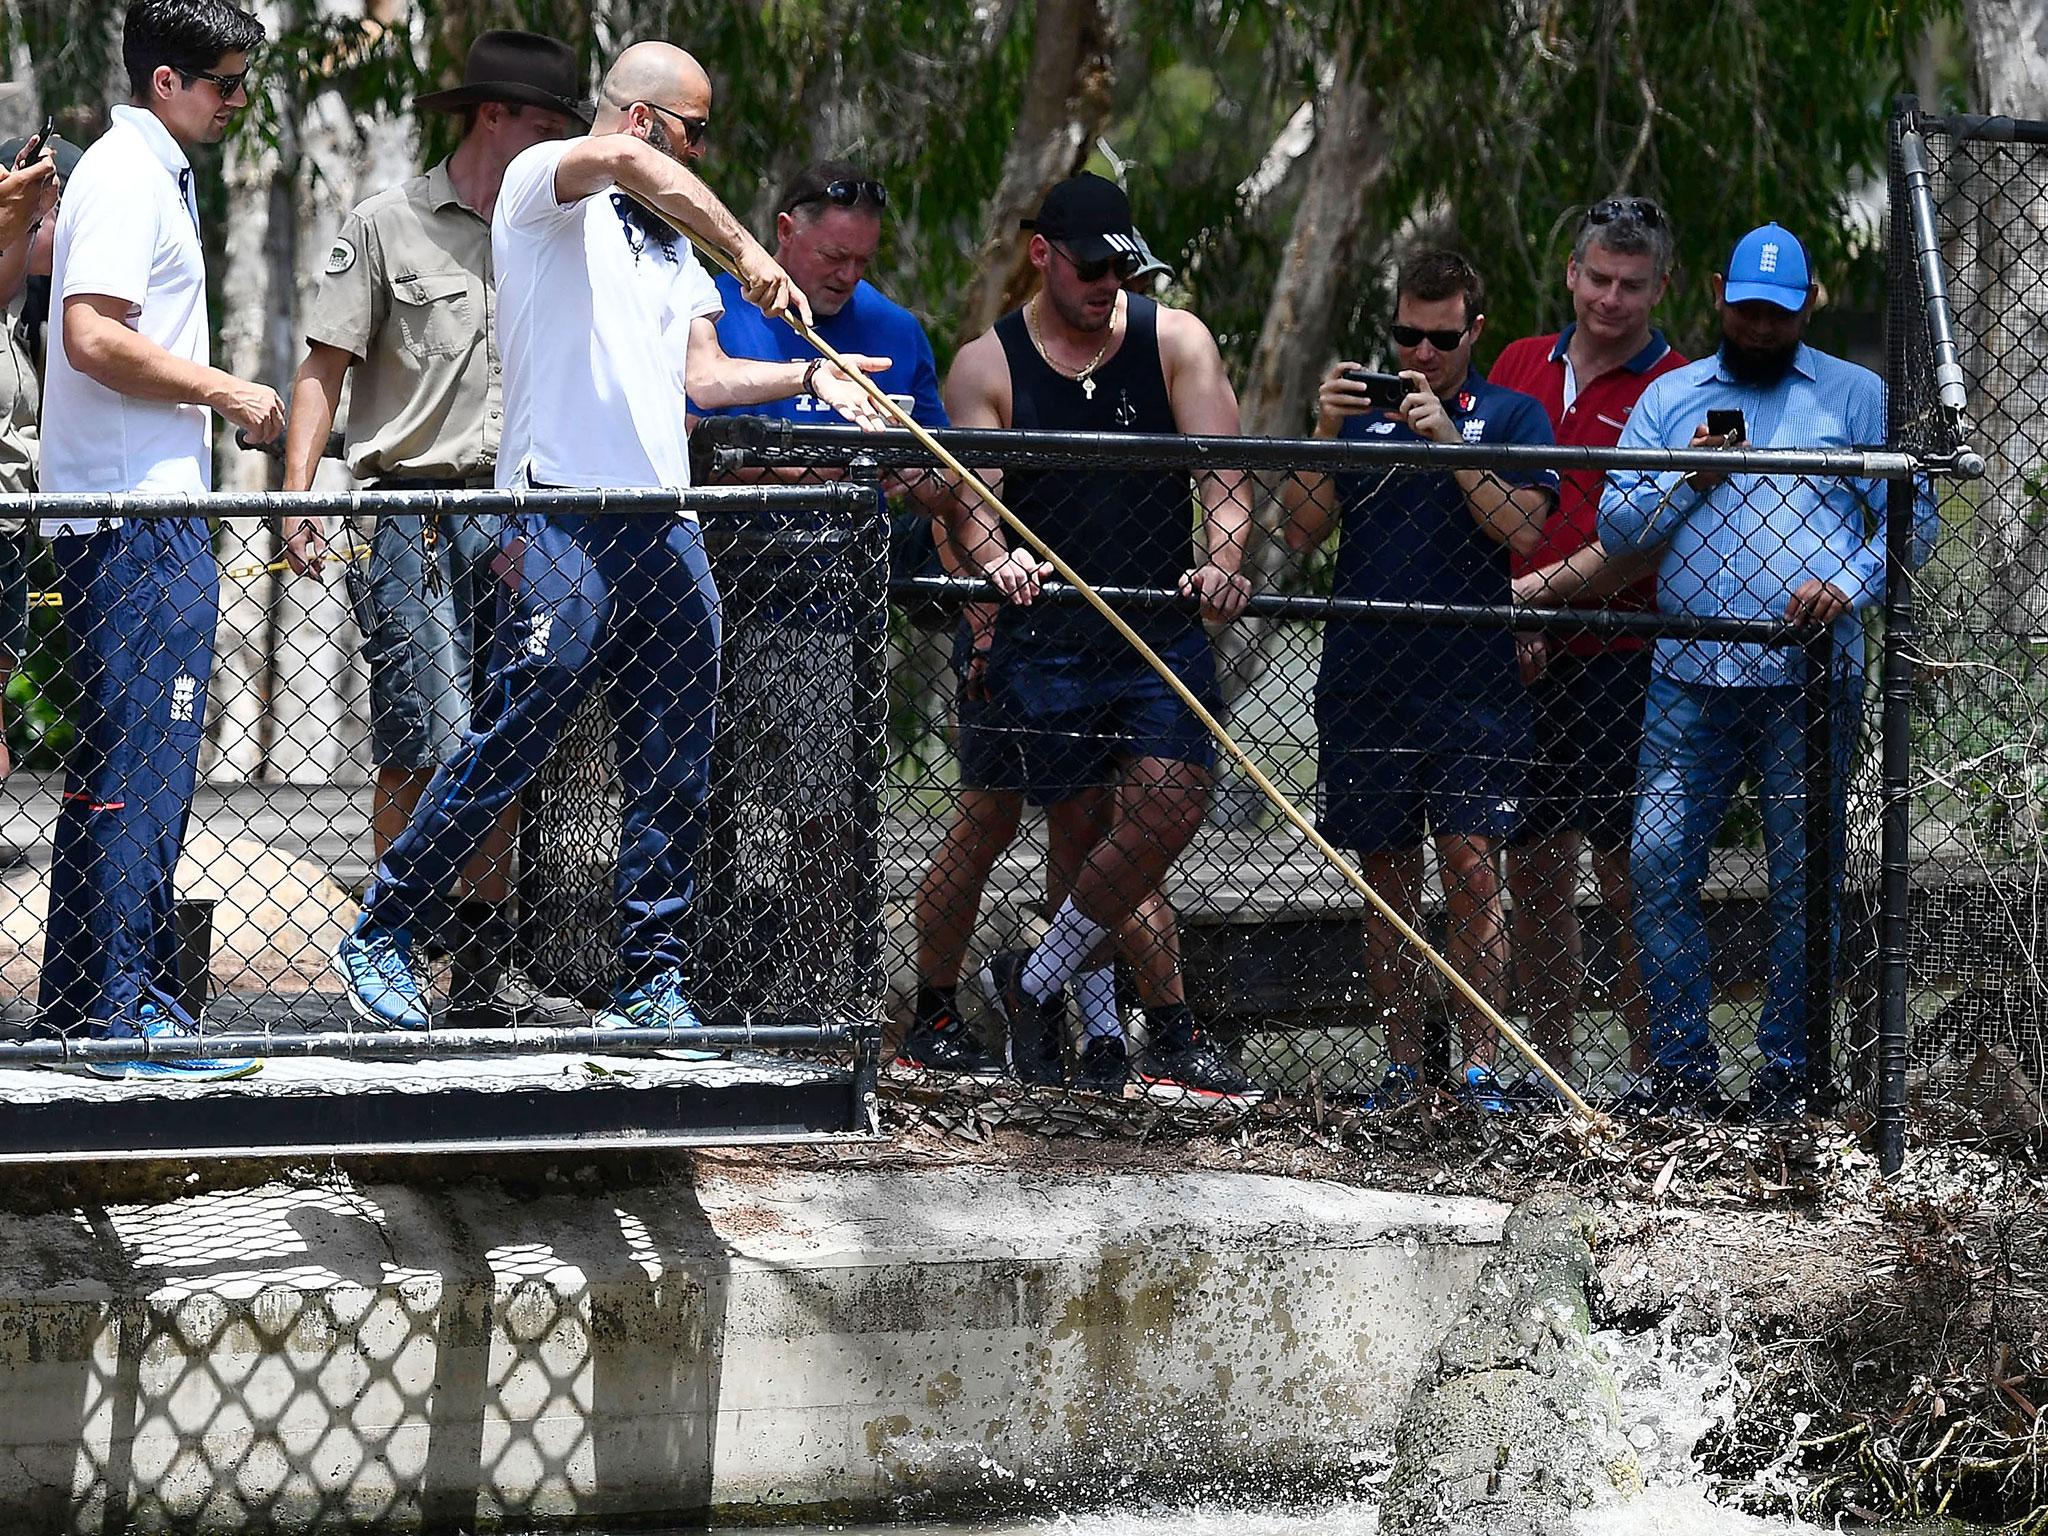 Moeen Ali feeds 'Bully' during a trip to Billabong Sanctuary on the outskirts of Townsville